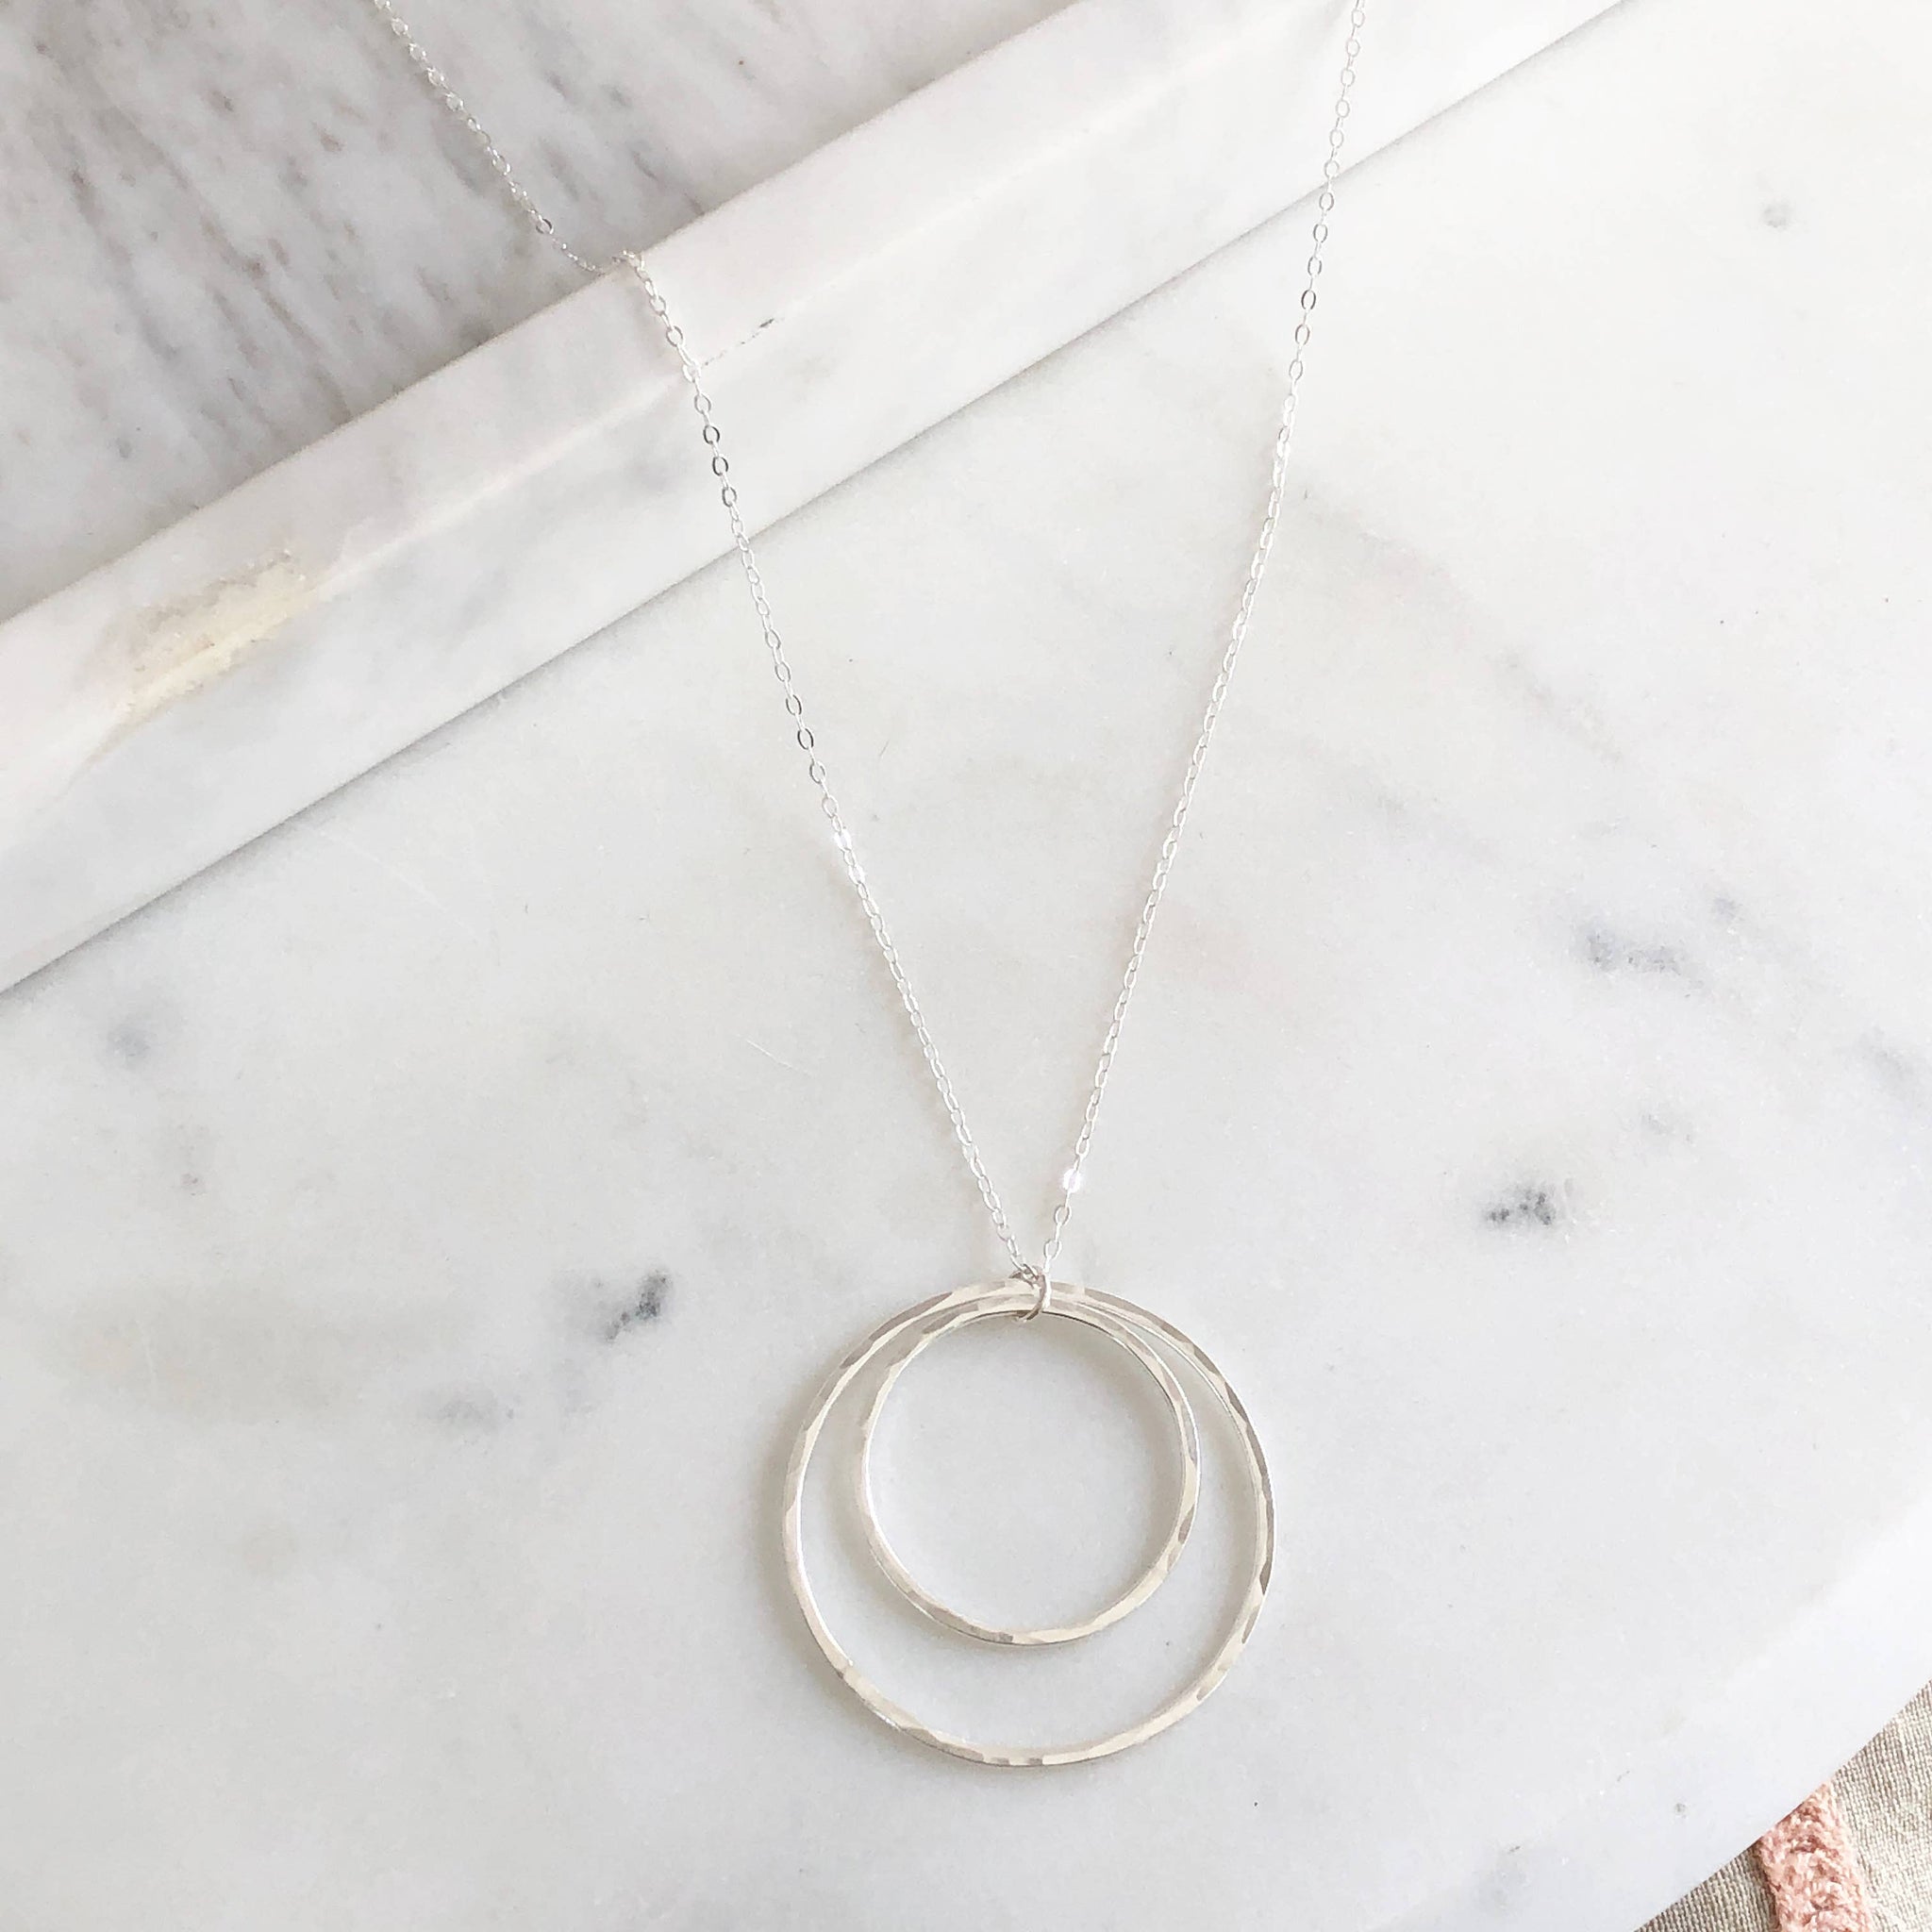 Token Jewelry Eclipse Necklace - Silver